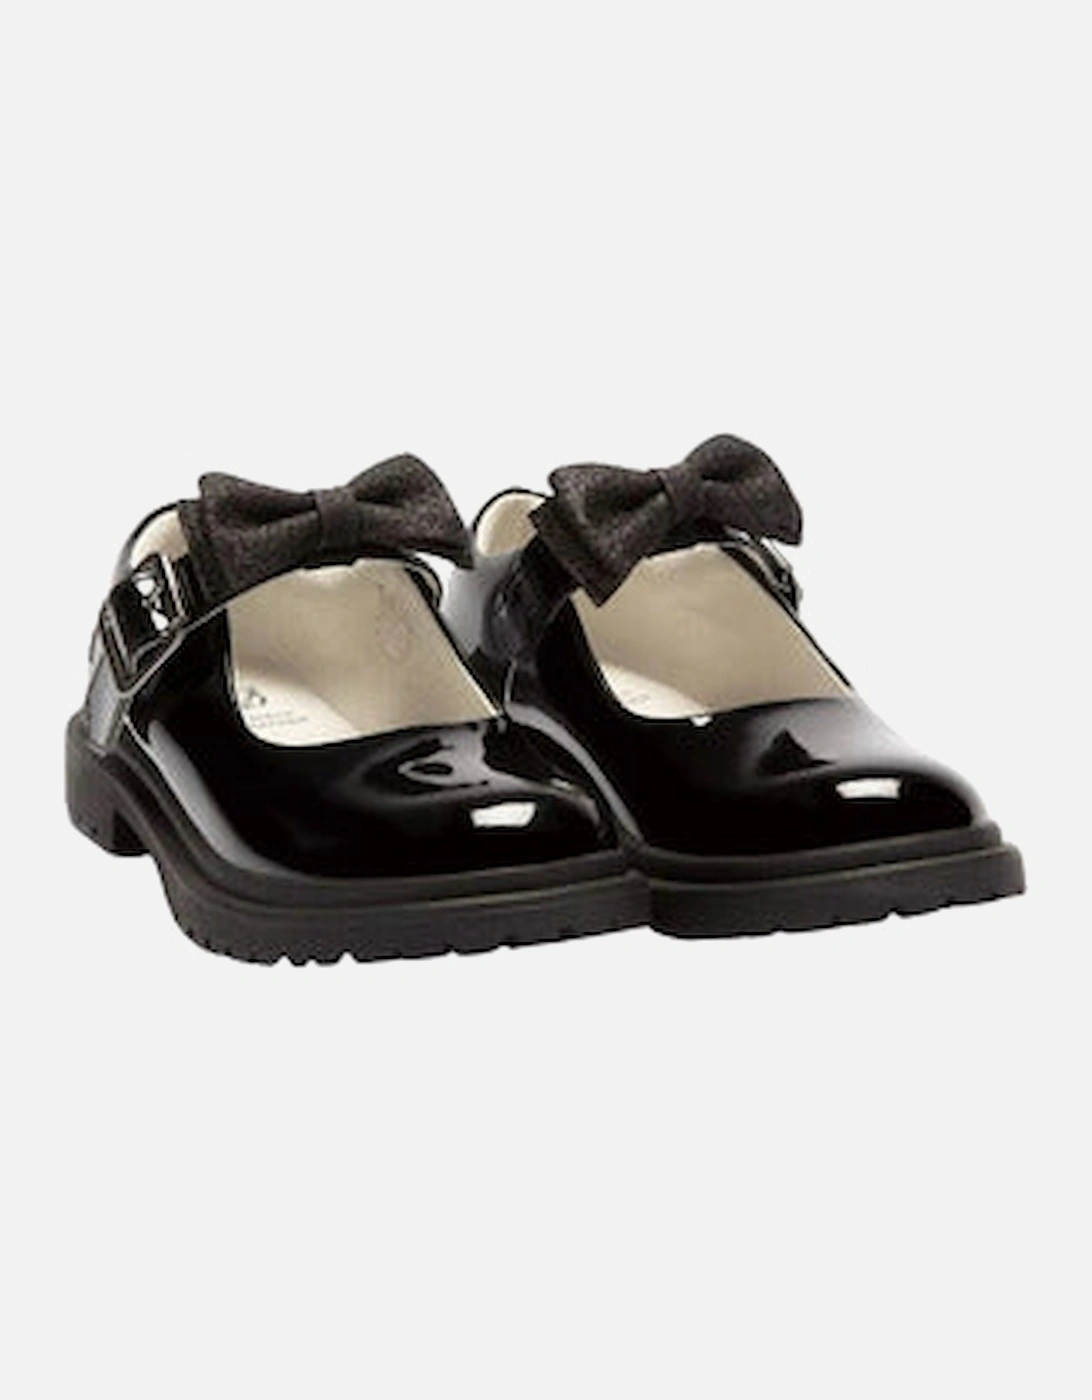 School Shoes 8359 Mollie in Black Patent, 2 of 1